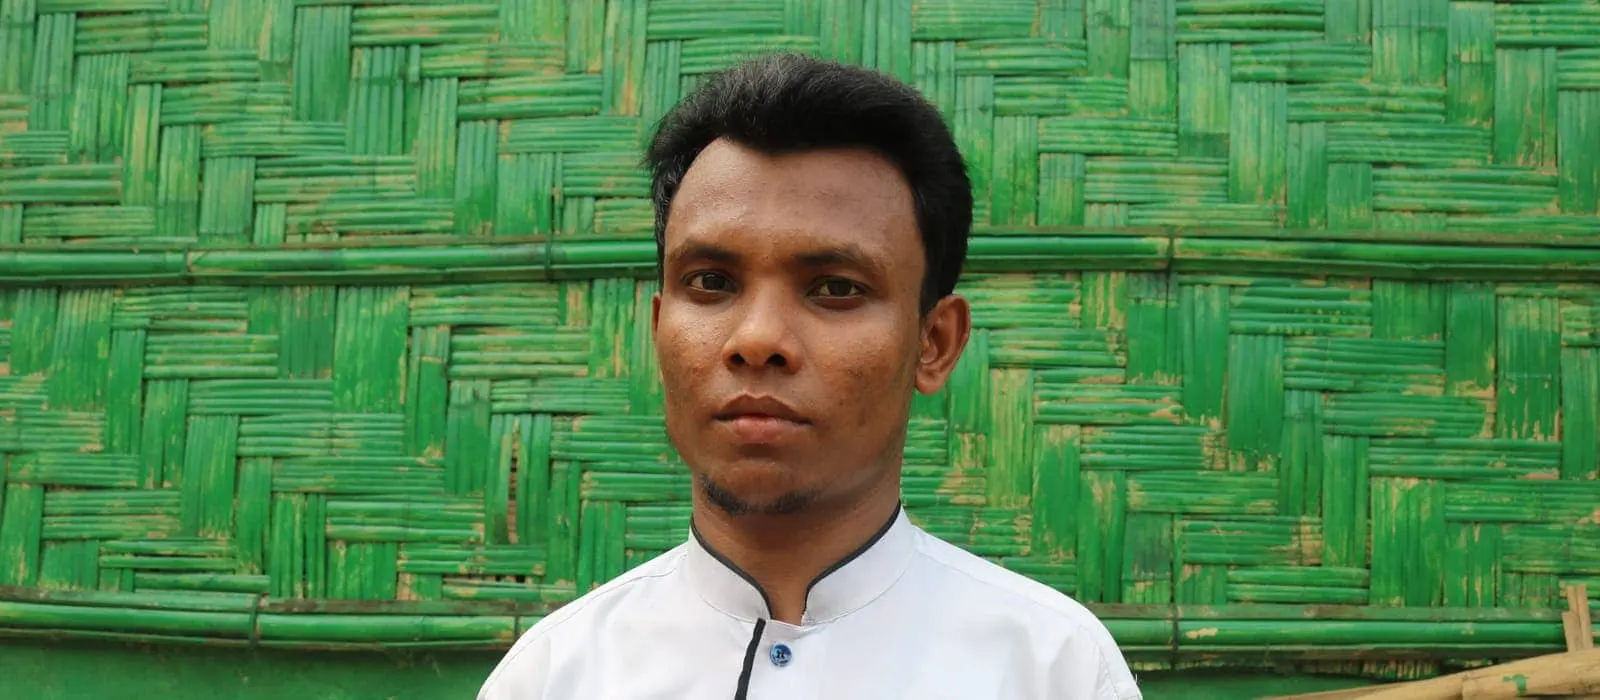 Amir* is a refugee and a volunteer at one of Concern's nutrition centers in Cox's Bazar, Bangladesh.